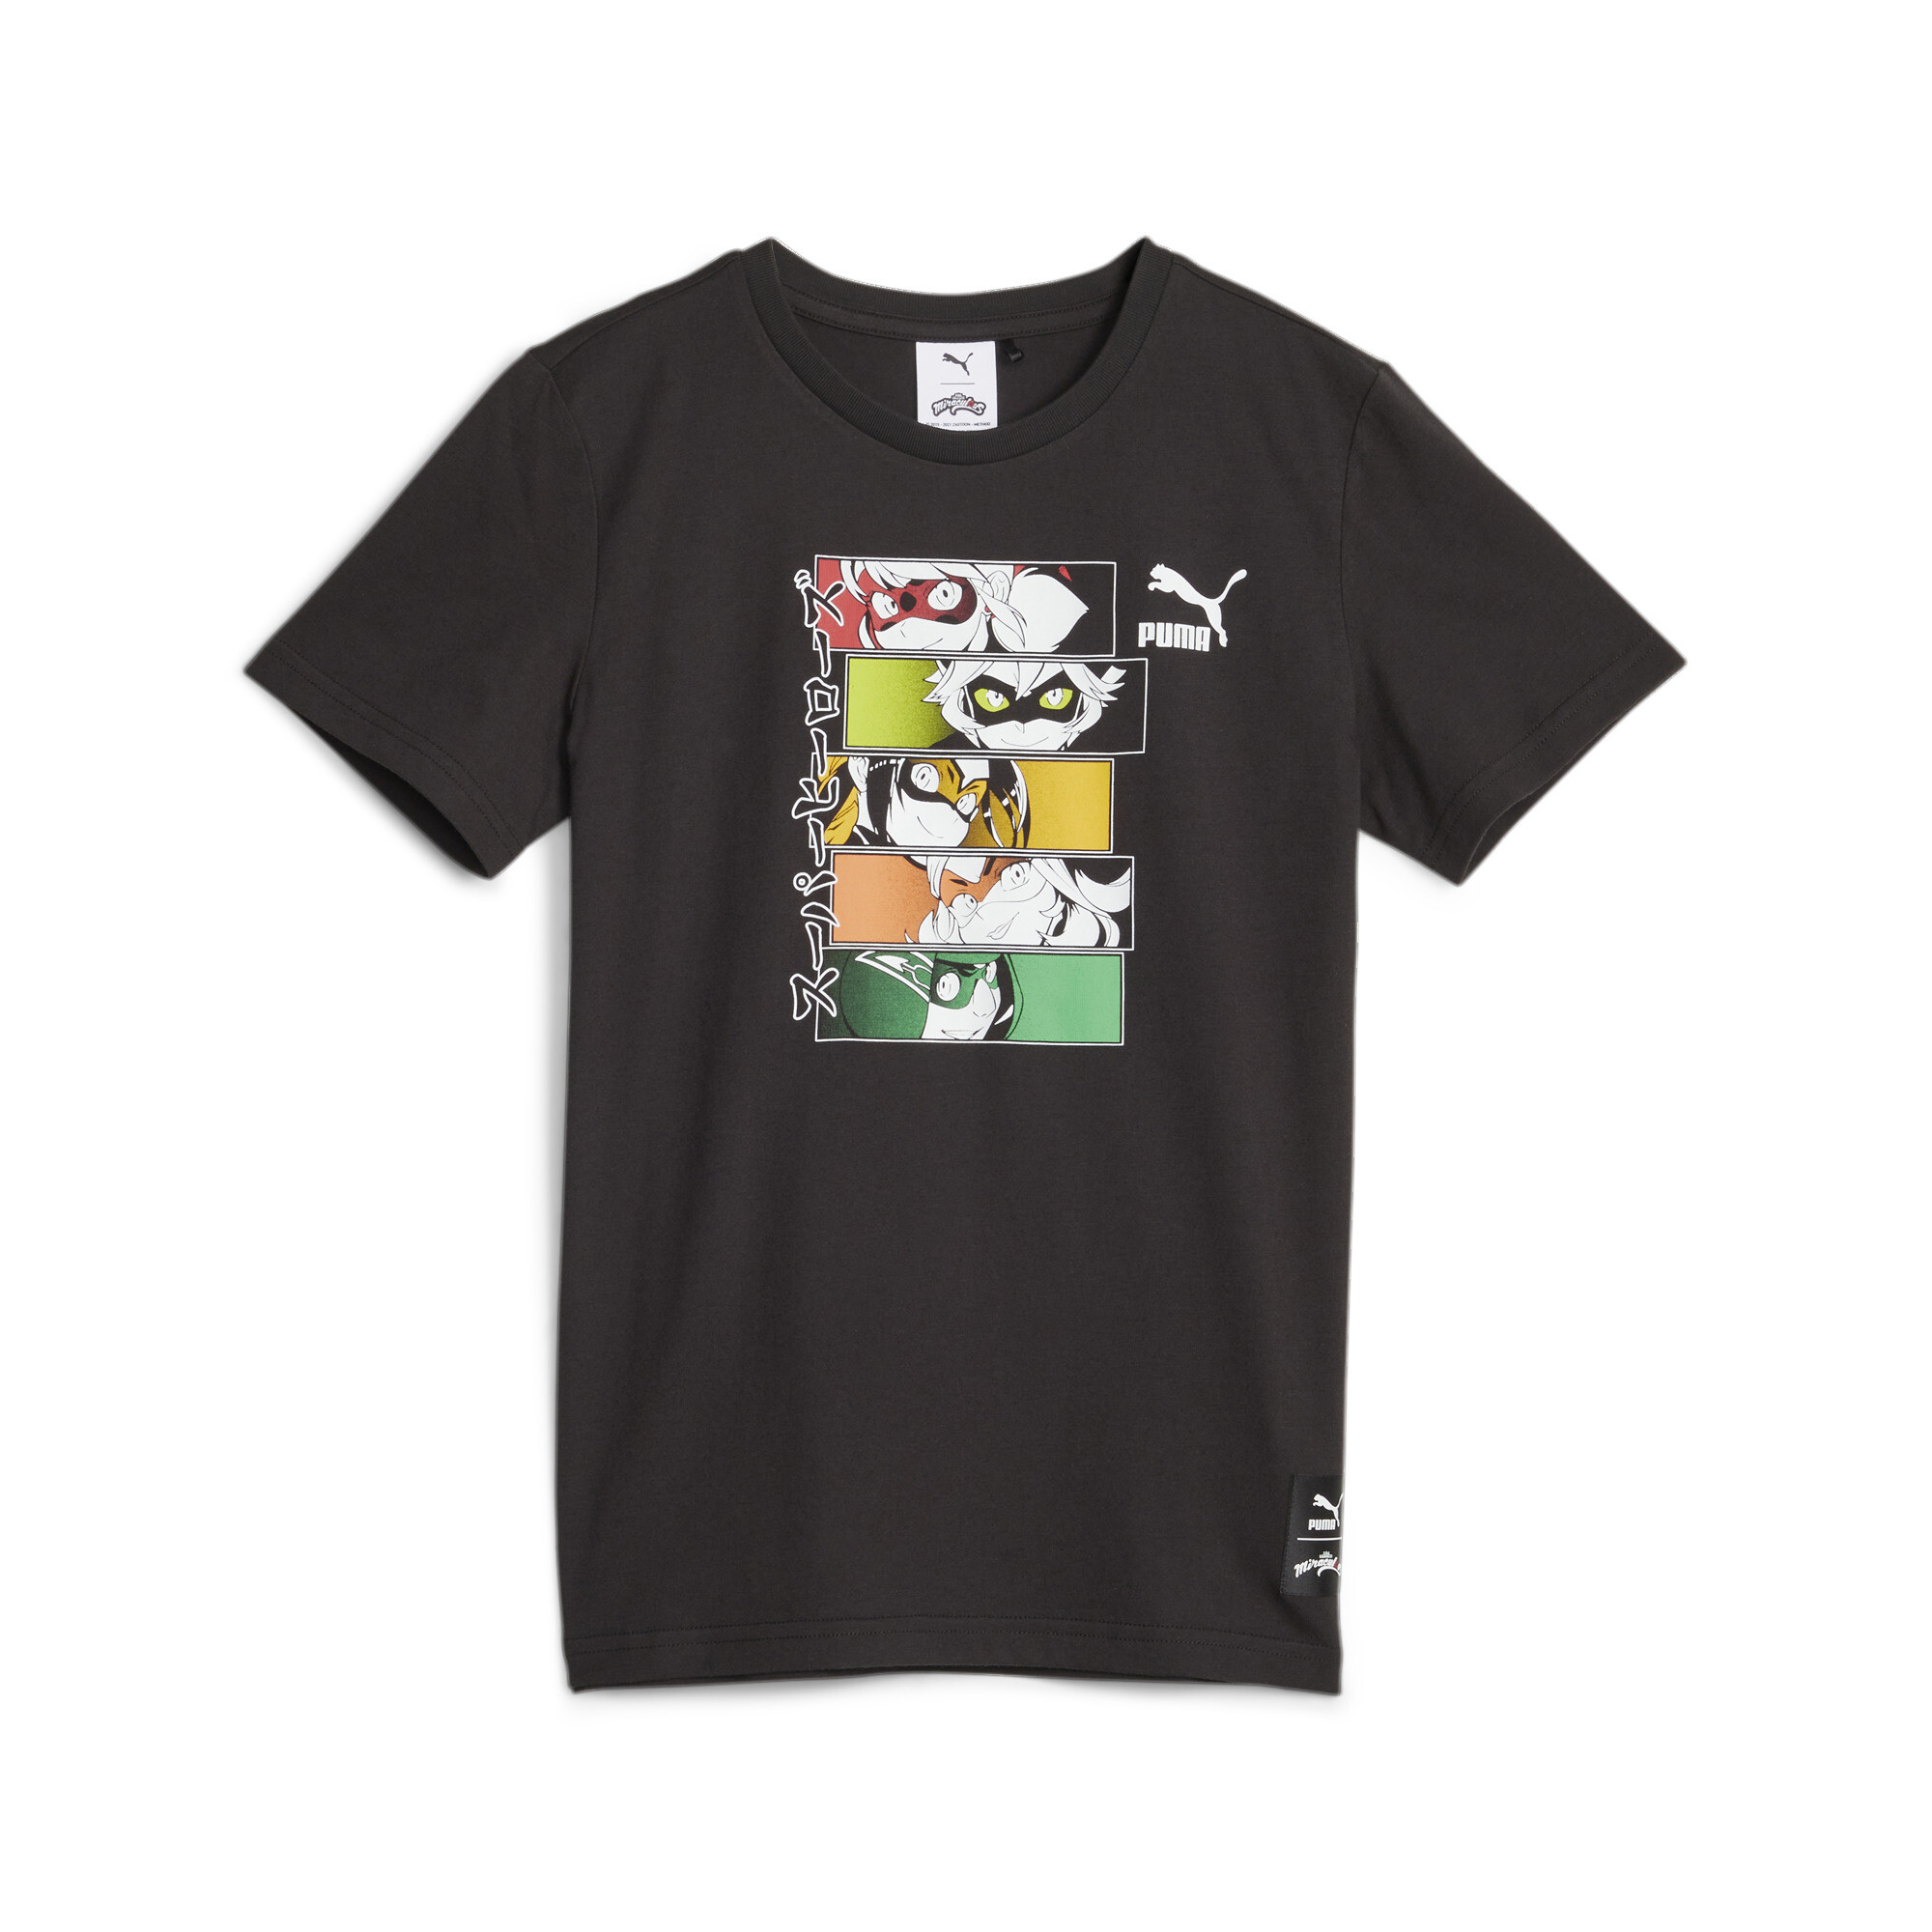 PUMA X MIRACULOUS T-Shirt In 10 - Black, Size 13-14 Youth